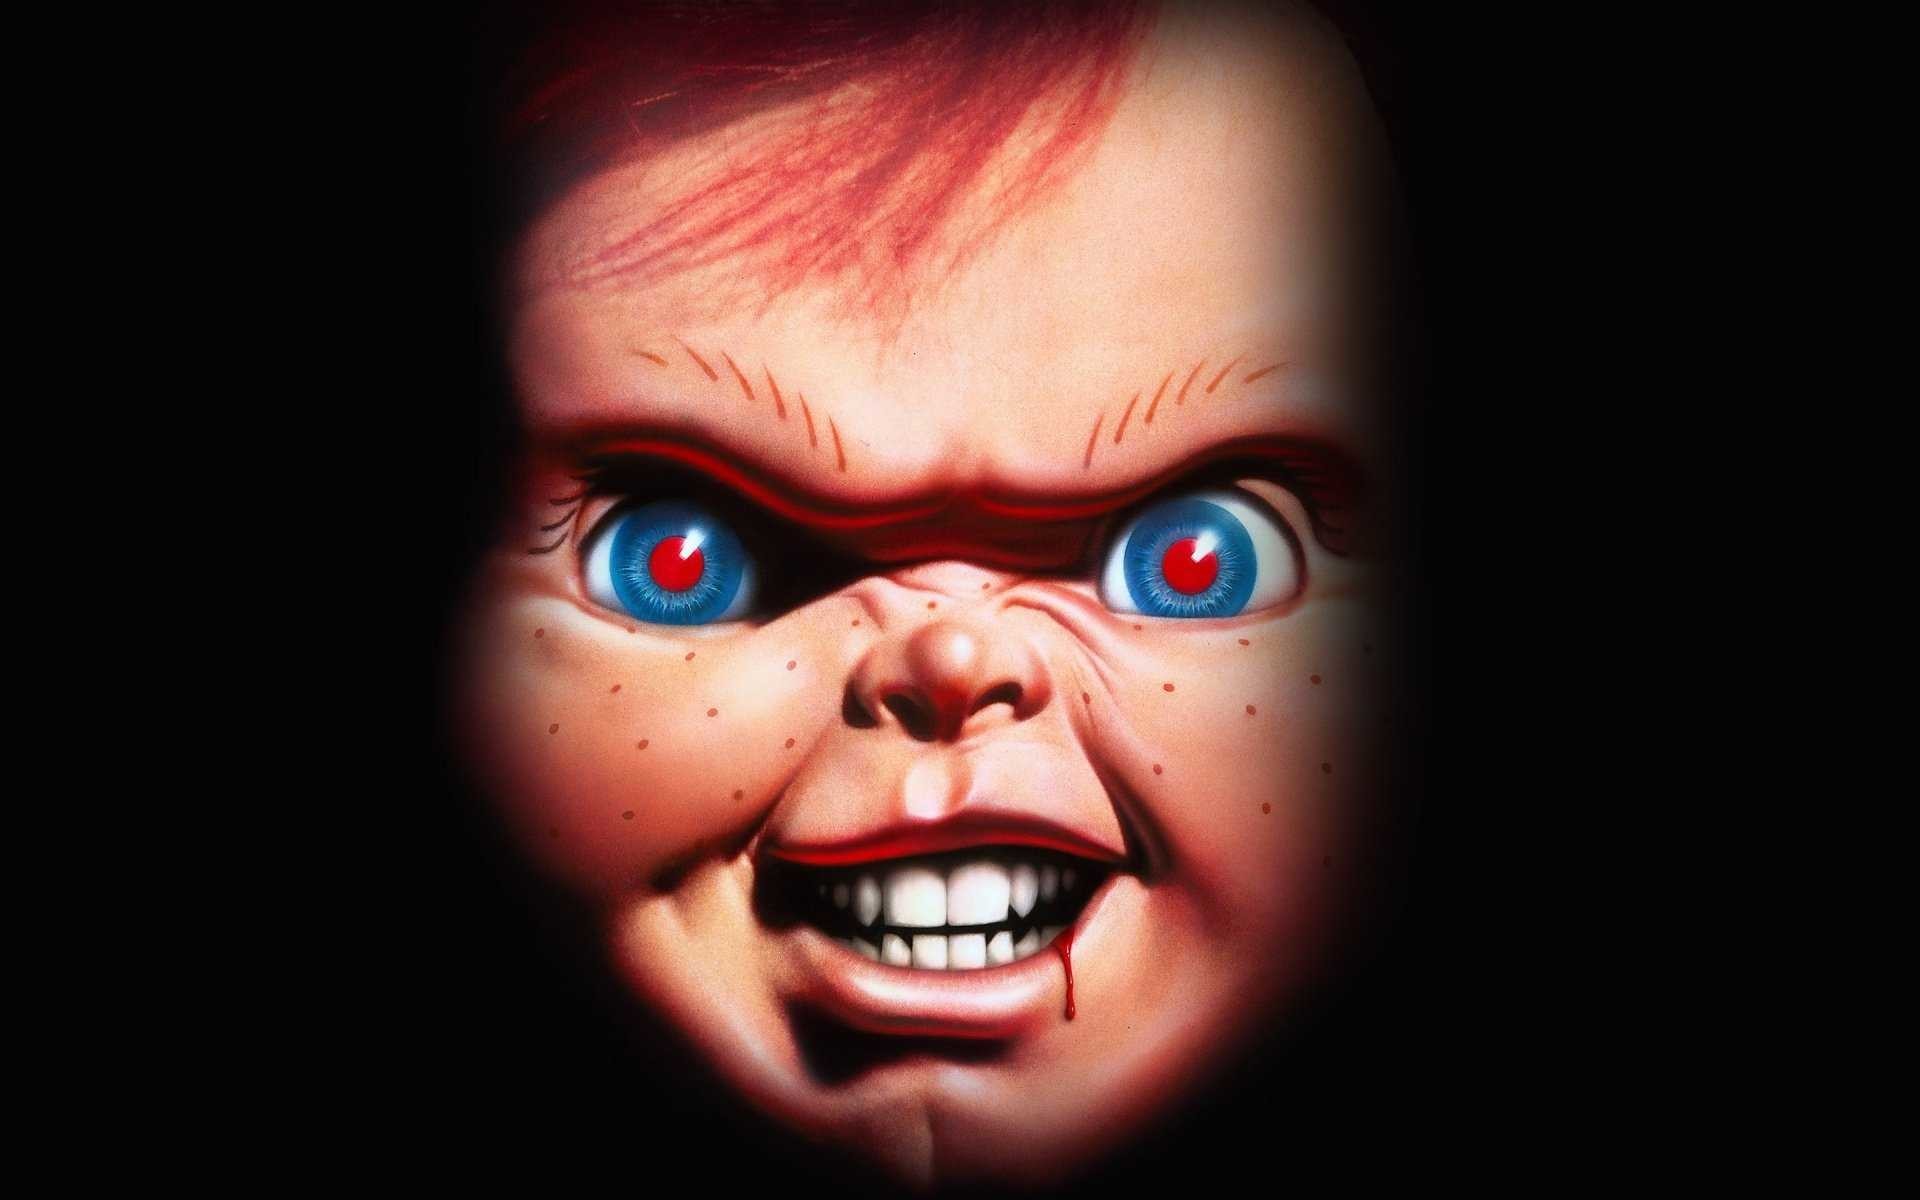 Chucky Wallpaper HD 2018 APK for Android Download